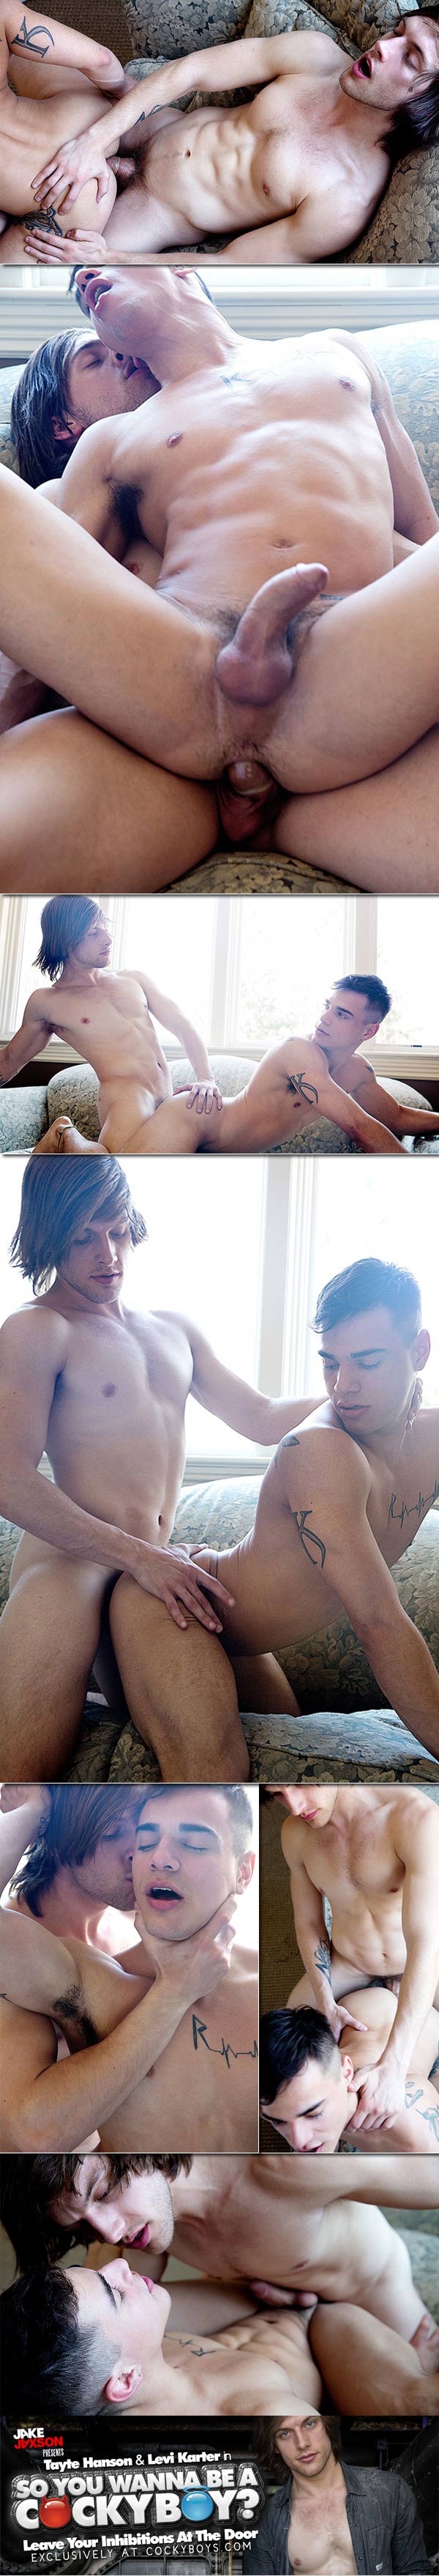 So You Want To Be A CockyBoy? (Tayte Hanson & Levi Karter) at CockyBoys.com